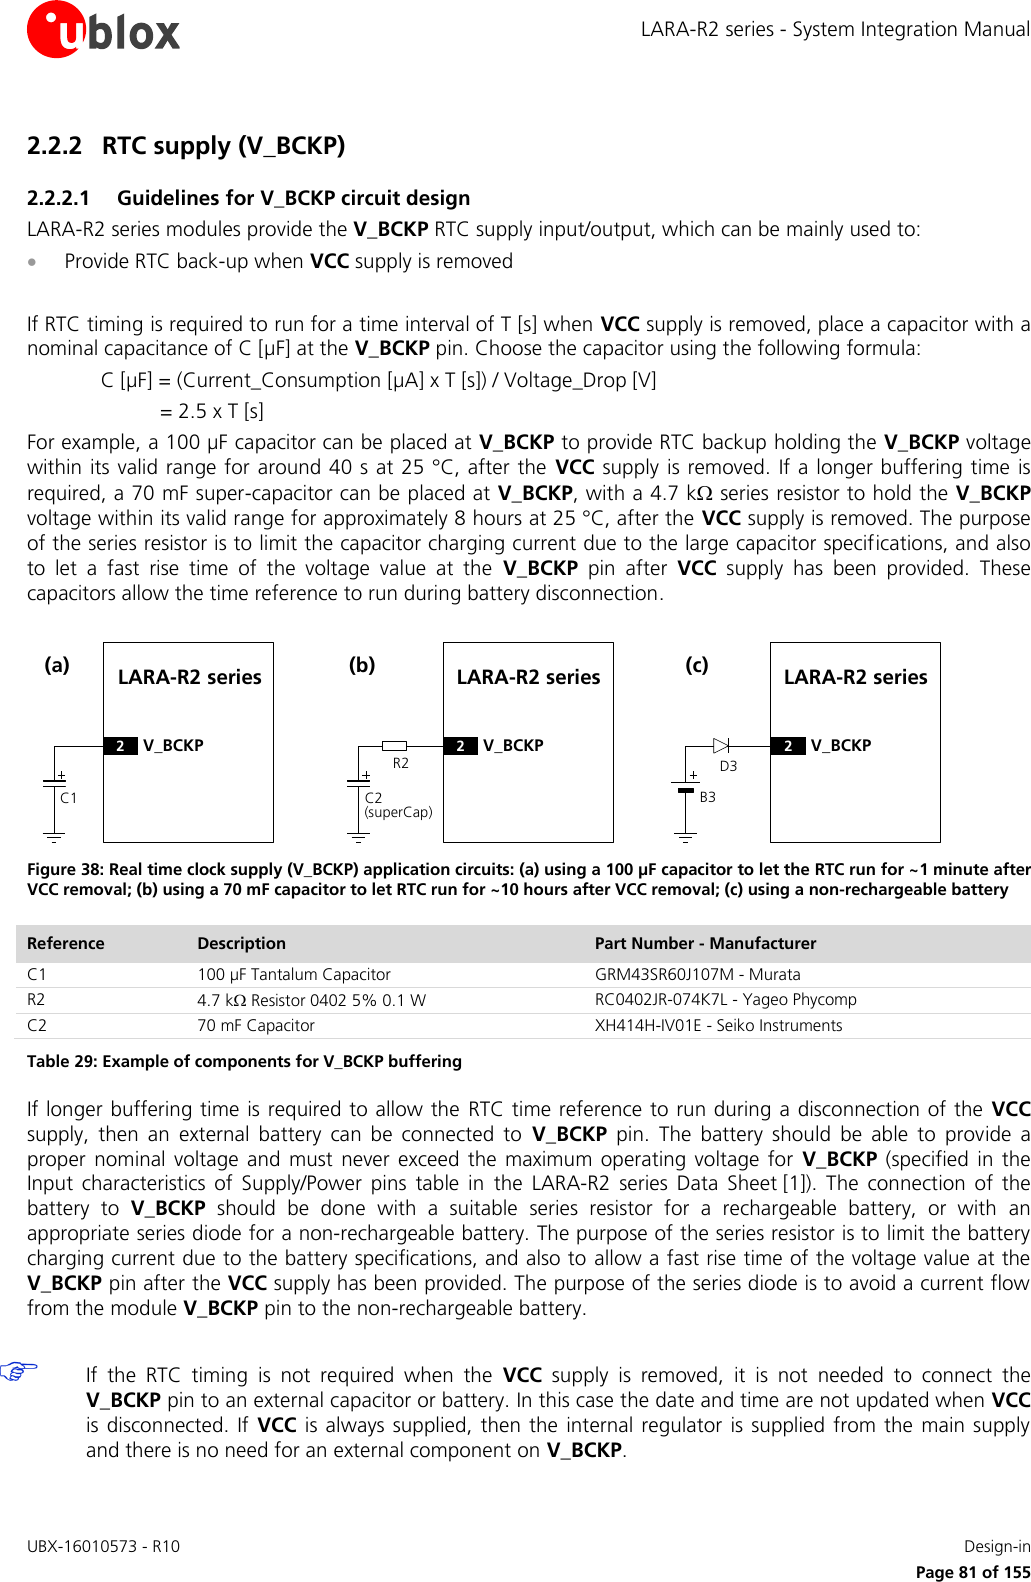 LARA-R2 series - System Integration Manual UBX-16010573 - R10    Design-in     Page 81 of 155 2.2.2 RTC supply (V_BCKP) 2.2.2.1 Guidelines for V_BCKP circuit design LARA-R2 series modules provide the V_BCKP RTC supply input/output, which can be mainly used to:   Provide RTC back-up when VCC supply is removed  If RTC timing is required to run for a time interval of T [s] when VCC supply is removed, place a capacitor with a nominal capacitance of C [µF] at the V_BCKP pin. Choose the capacitor using the following formula: C [µF] = (Current_Consumption [µA] x T [s]) / Voltage_Drop [V] = 2.5 x T [s]  For example, a 100 µF capacitor can be placed at V_BCKP to provide RTC backup holding the V_BCKP voltage within its valid range for around 40 s at 25 °C, after the  VCC supply is removed.  If a longer buffering time is required, a 70 mF super-capacitor can be placed at V_BCKP, with a 4.7 k series resistor to hold the V_BCKP voltage within its valid range for approximately 8 hours at 25 °C, after the VCC supply is removed. The purpose of the series resistor is to limit the capacitor charging current due to the large capacitor specifications, and also to  let  a  fast  rise  time  of  the  voltage  value  at  the  V_BCKP  pin  after  VCC  supply  has  been  provided.  These capacitors allow the time reference to run during battery disconnection. LARA-R2 seriesC1(a)2V_BCKPR2LARA-R2 seriesC2(superCap)(b)2V_BCKPD3LARA-R2 seriesB3(c)2V_BCKP Figure 38: Real time clock supply (V_BCKP) application circuits: (a) using a 100 µF capacitor to let the RTC run for ~1 minute after VCC removal; (b) using a 70 mF capacitor to let RTC run for ~10 hours after VCC removal; (c) using a non-rechargeable battery Reference Description Part Number - Manufacturer C1 100 µF Tantalum Capacitor GRM43SR60J107M - Murata R2 4.7 k Resistor 0402 5% 0.1 W  RC0402JR-074K7L - Yageo Phycomp C2 70 mF Capacitor  XH414H-IV01E - Seiko Instruments Table 29: Example of components for V_BCKP buffering If longer buffering time is required to allow the  RTC time reference to run during a disconnection of the  VCC supply,  then  an  external  battery  can  be  connected  to  V_BCKP  pin.  The  battery  should  be  able  to  provide  a proper  nominal voltage  and  must  never  exceed  the maximum  operating  voltage  for  V_BCKP  (specified  in the Input  characteristics  of  Supply/Power  pins  table  in  the  LARA-R2  series Data  Sheet [1]).  The  connection  of  the battery  to  V_BCKP  should  be  done  with  a  suitable  series  resistor  for  a  rechargeable  battery,  or  with  an appropriate series diode for a non-rechargeable battery. The purpose of the series resistor is to limit the battery charging current due to the battery specifications, and also to  allow a fast rise time of the voltage value at the V_BCKP pin after the VCC supply has been provided. The purpose of the series diode is to avoid a current flow from the module V_BCKP pin to the non-rechargeable battery.   If  the  RTC  timing  is  not  required  when  the  VCC  supply  is  removed,  it  is  not  needed  to  connect  the V_BCKP pin to an external capacitor or battery. In this case the date and time are not updated when VCC is disconnected. If  VCC is always supplied,  then the  internal regulator is  supplied from  the main  supply and there is no need for an external component on V_BCKP. 